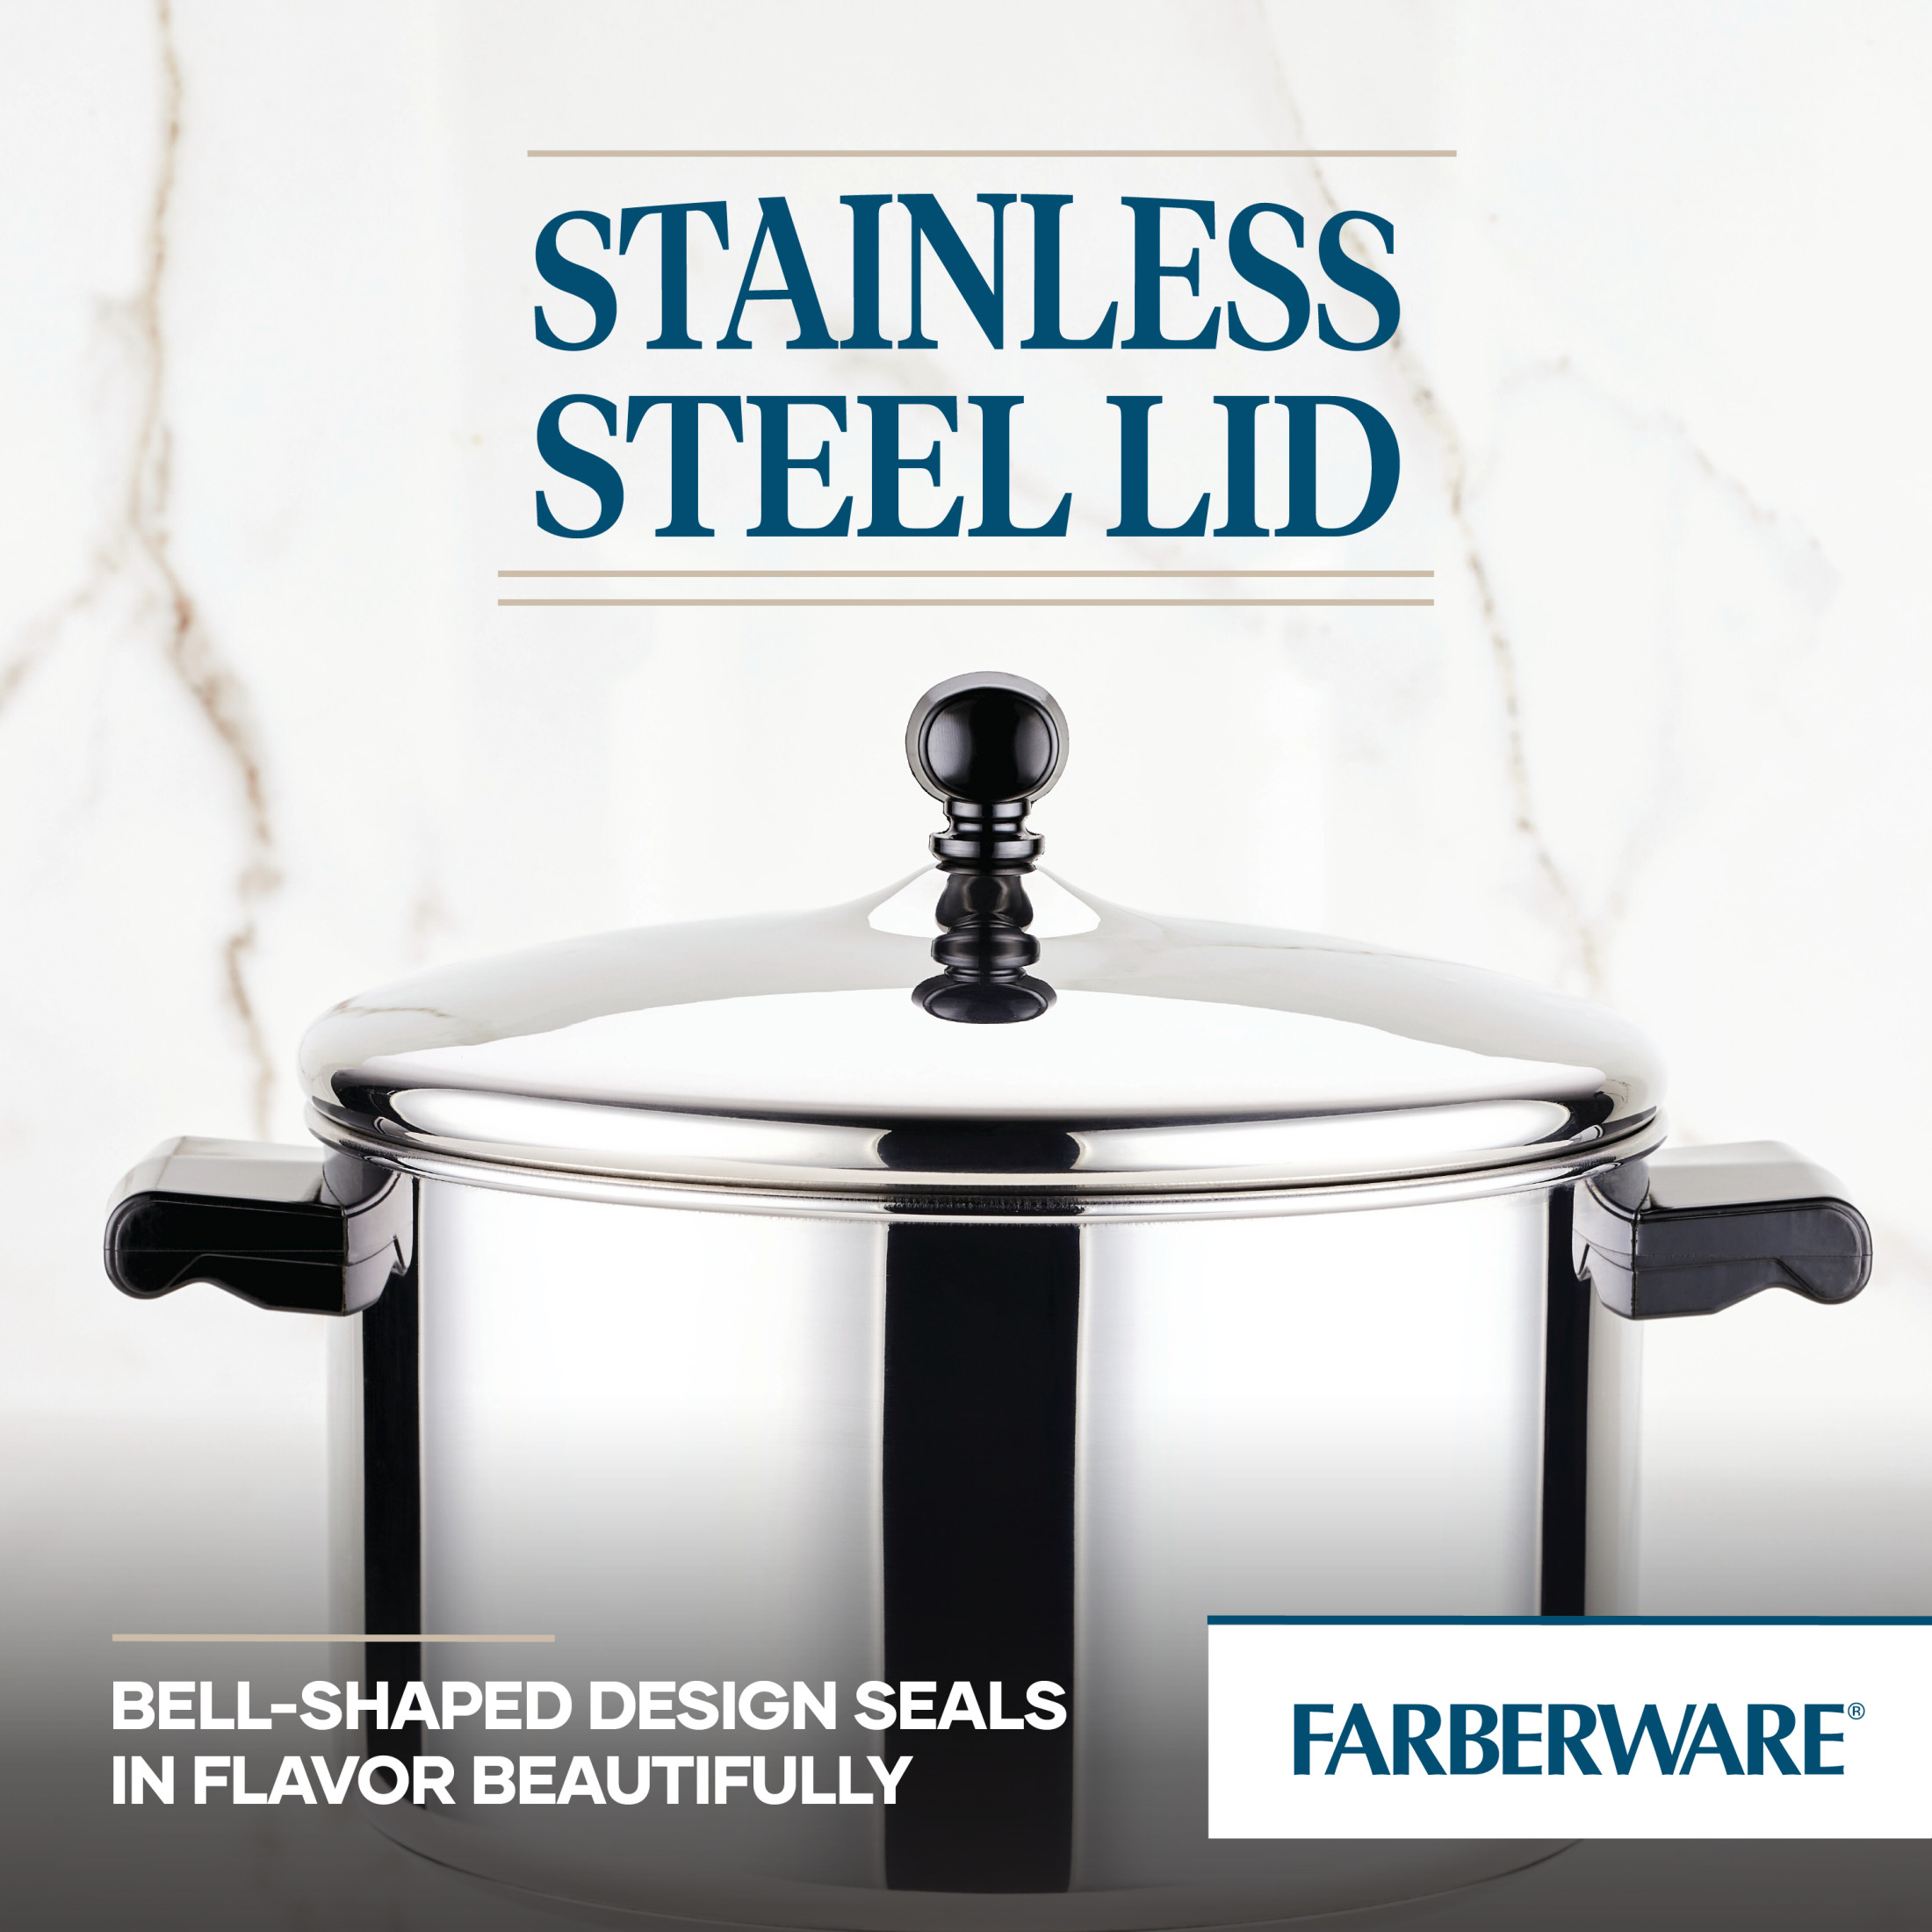 Farberware Classic 6 Quart Stainless Steel Covered Saucepot - image 4 of 9